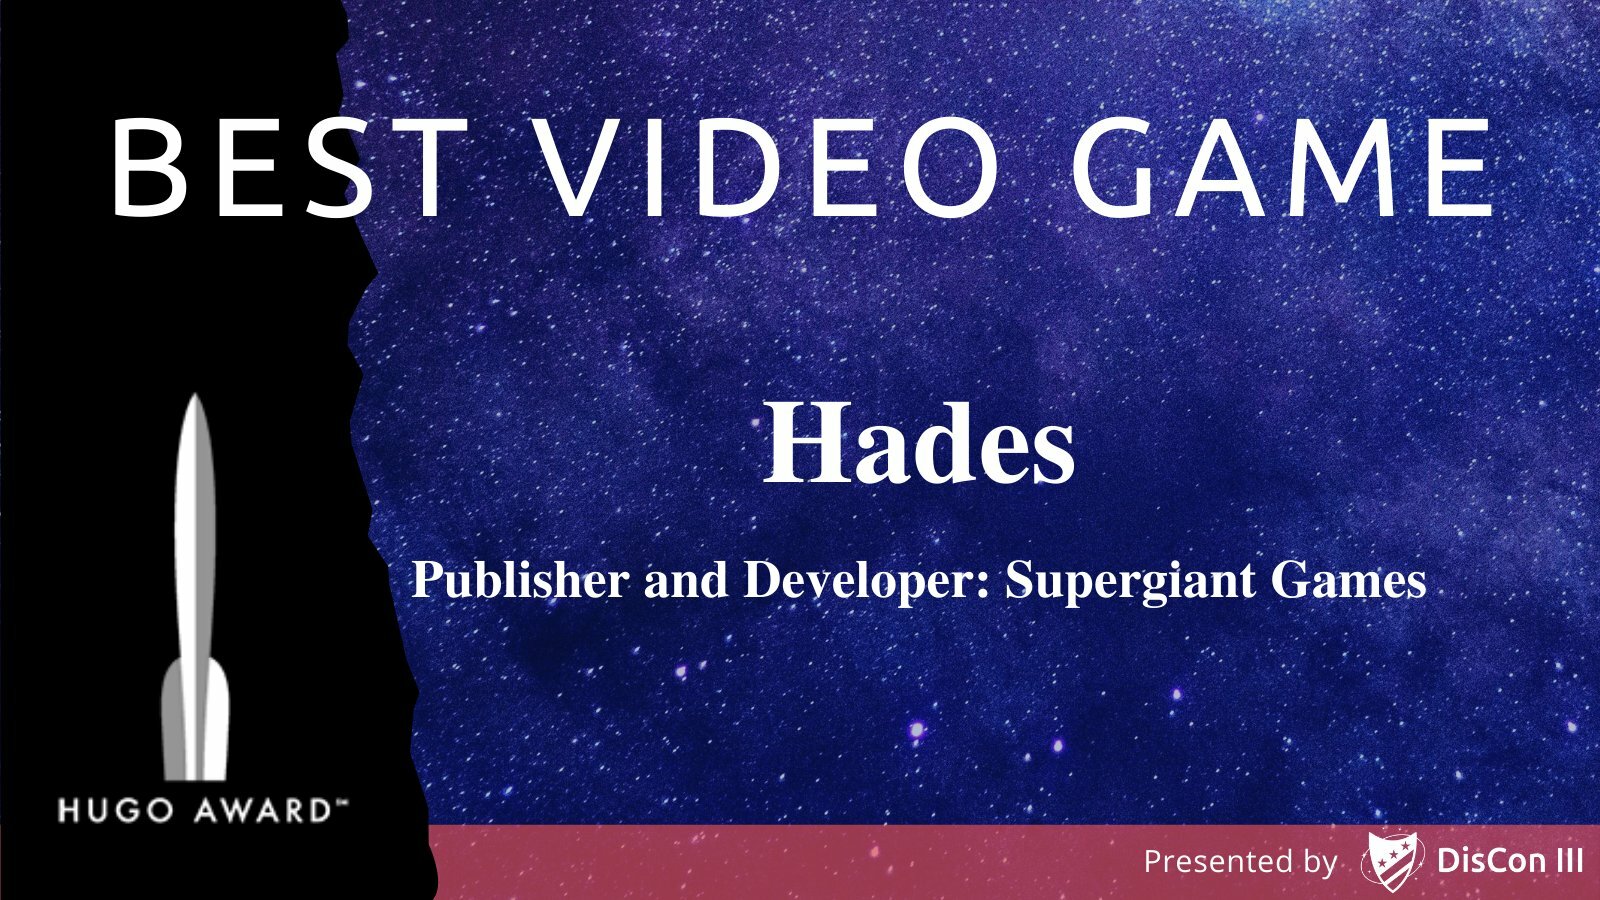 Hades cross-save function isn't coming with v1.0, planned for